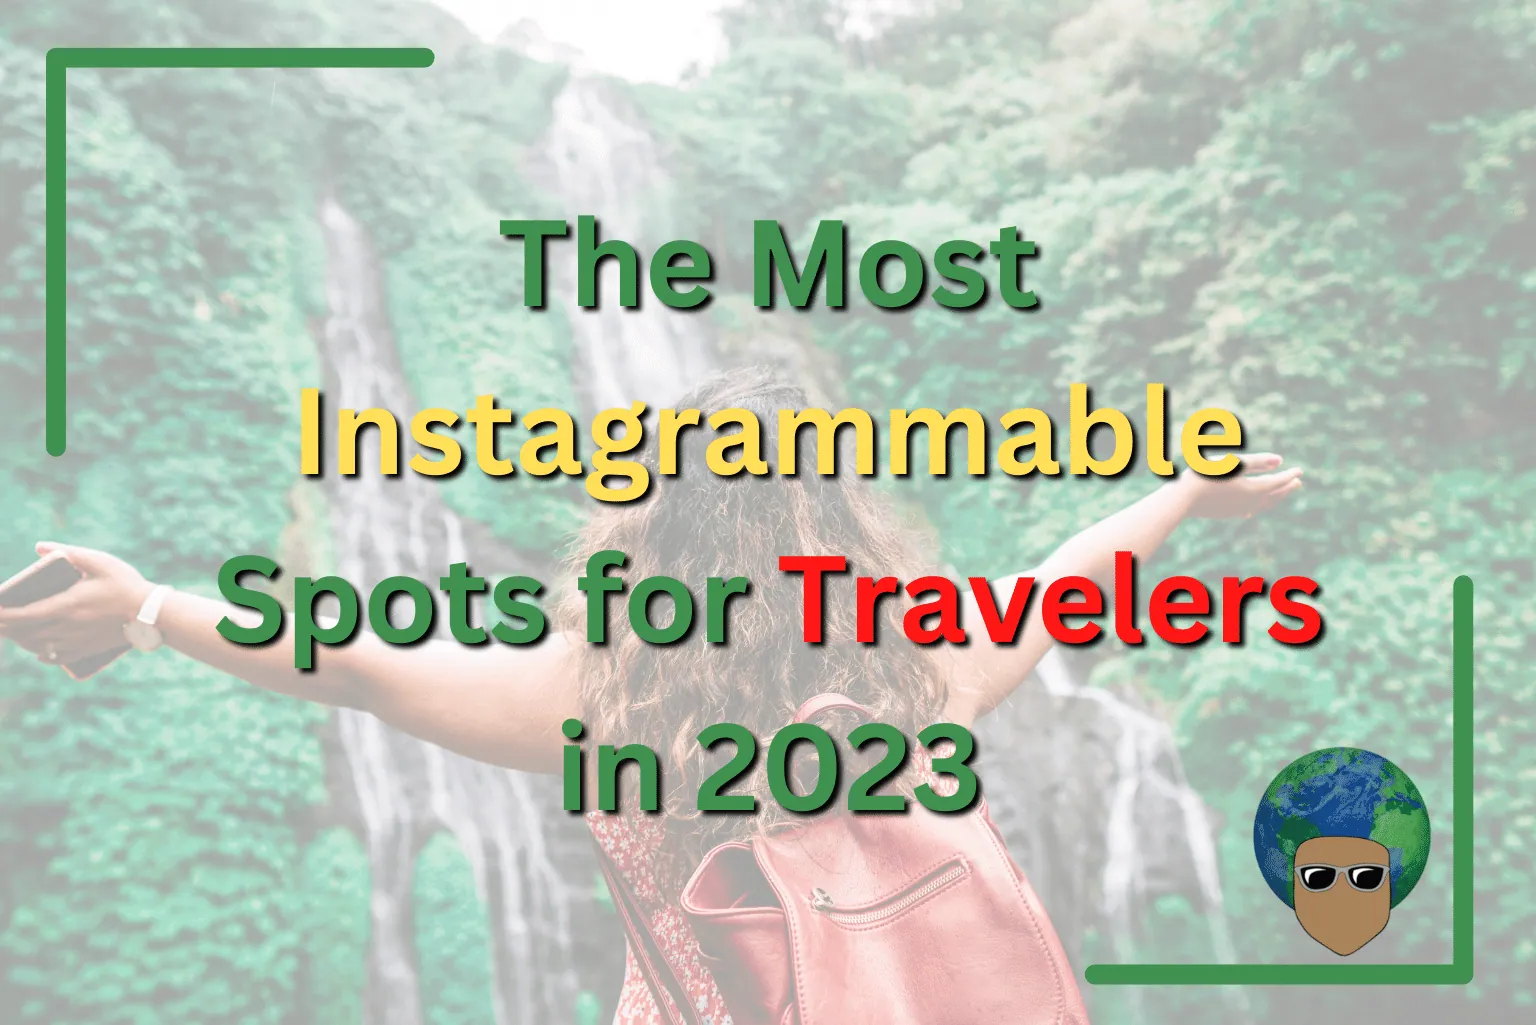 You are currently viewing The Most Instagrammable Spots for Travelers in 2023